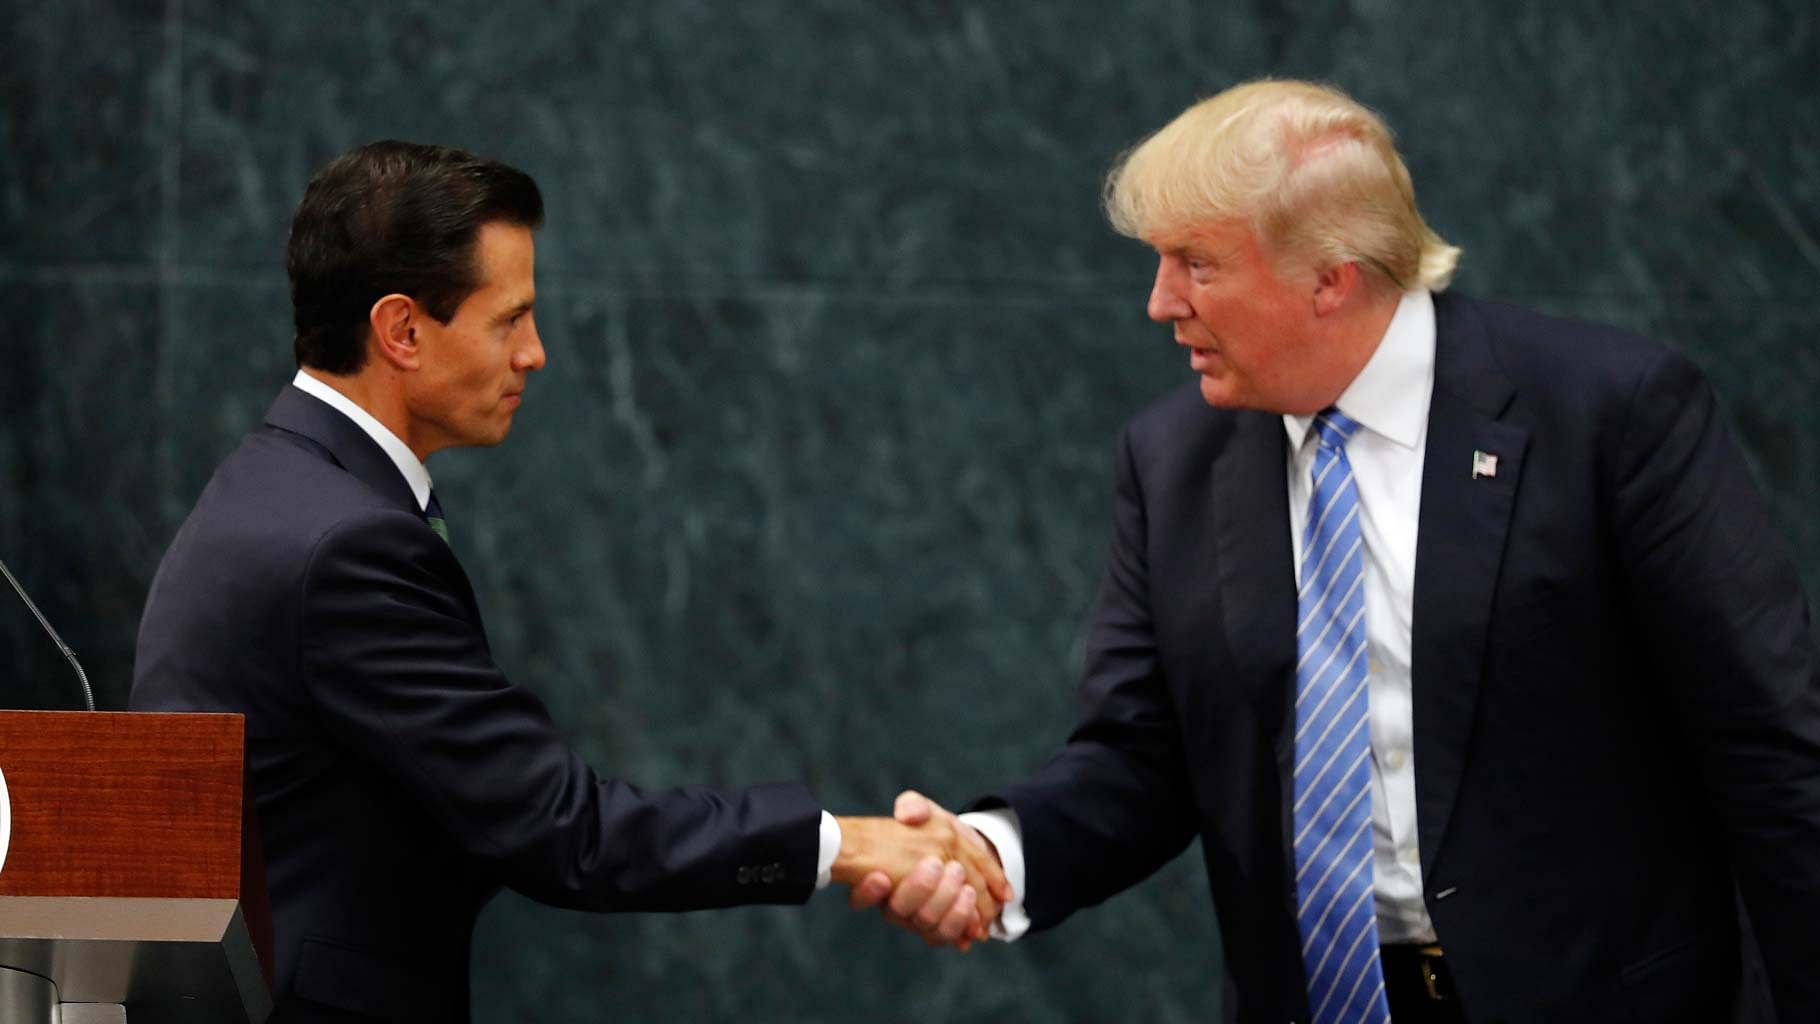 Mexico President Enrique Pena Nieto and Republican presidential nominee Donald Trump shake hands after a joint statement at Los Pinos. (Photo: AP)